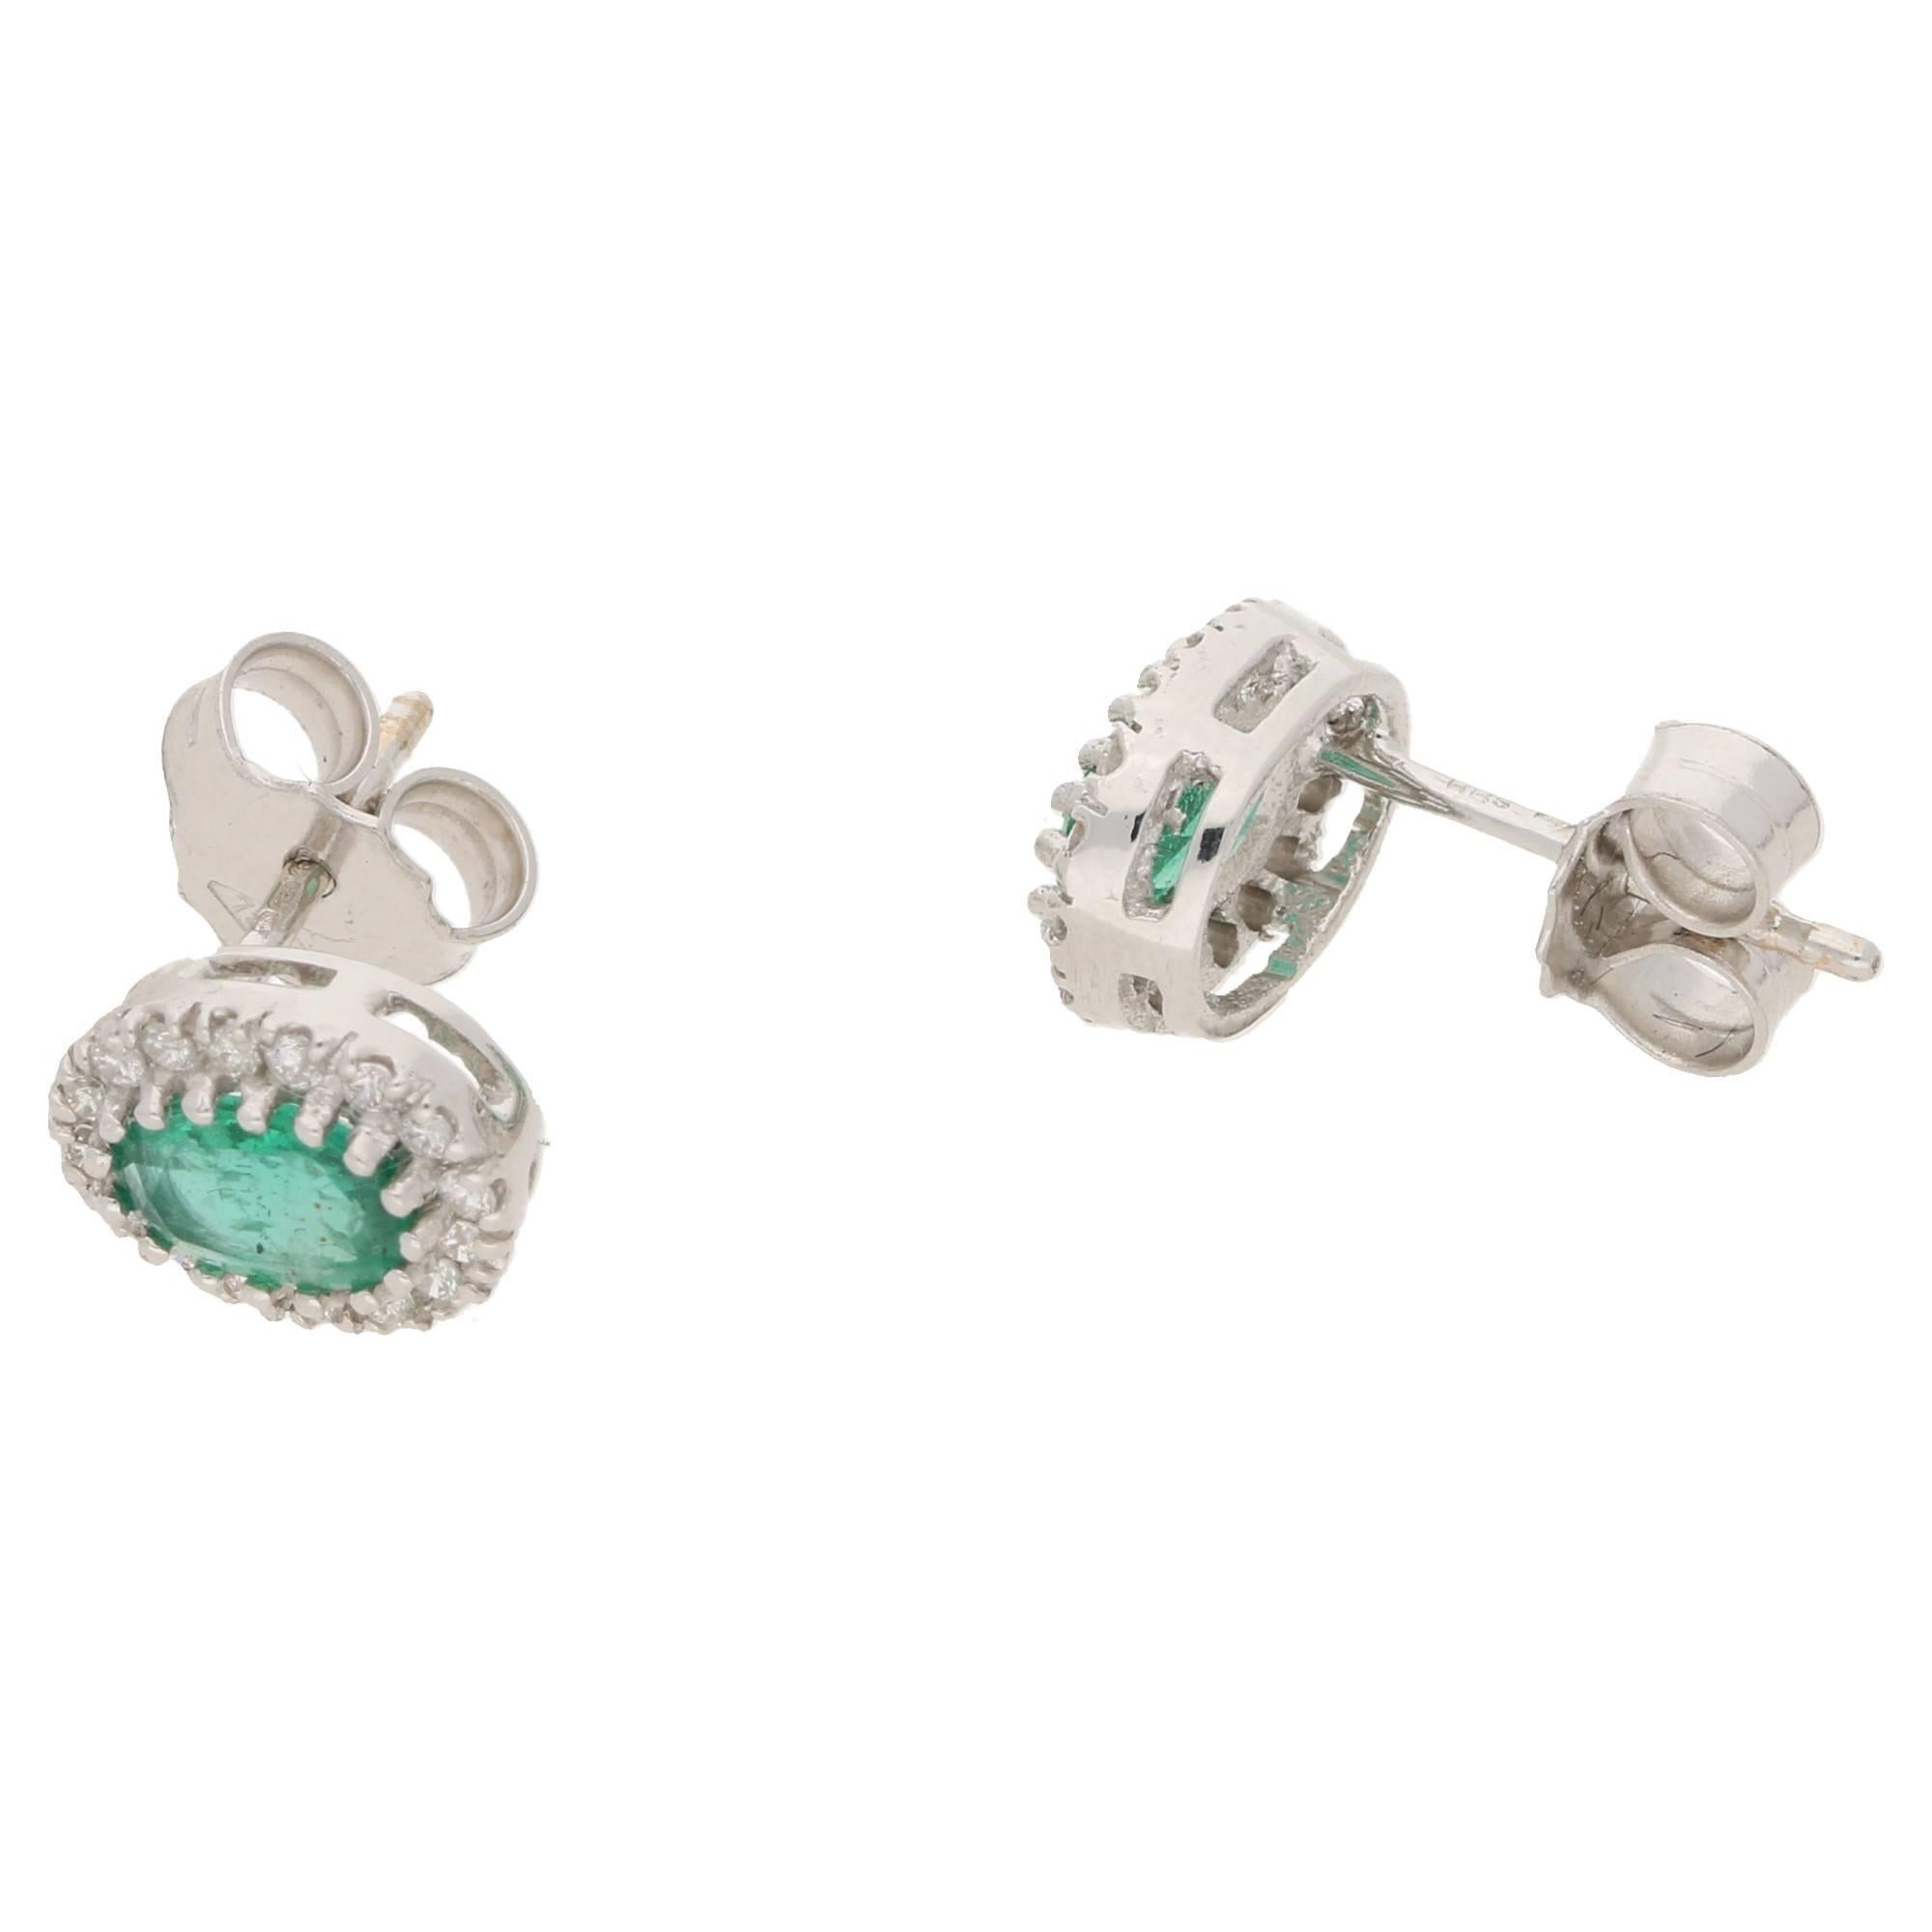 A pair of emerald and diamond cluster earrings. The earrings are formed of an oval cut emerald claw set to the centre, embellished by a single row of round brilliant cut diamonds. These earrings are made in 18ct white gold and have a post and scroll